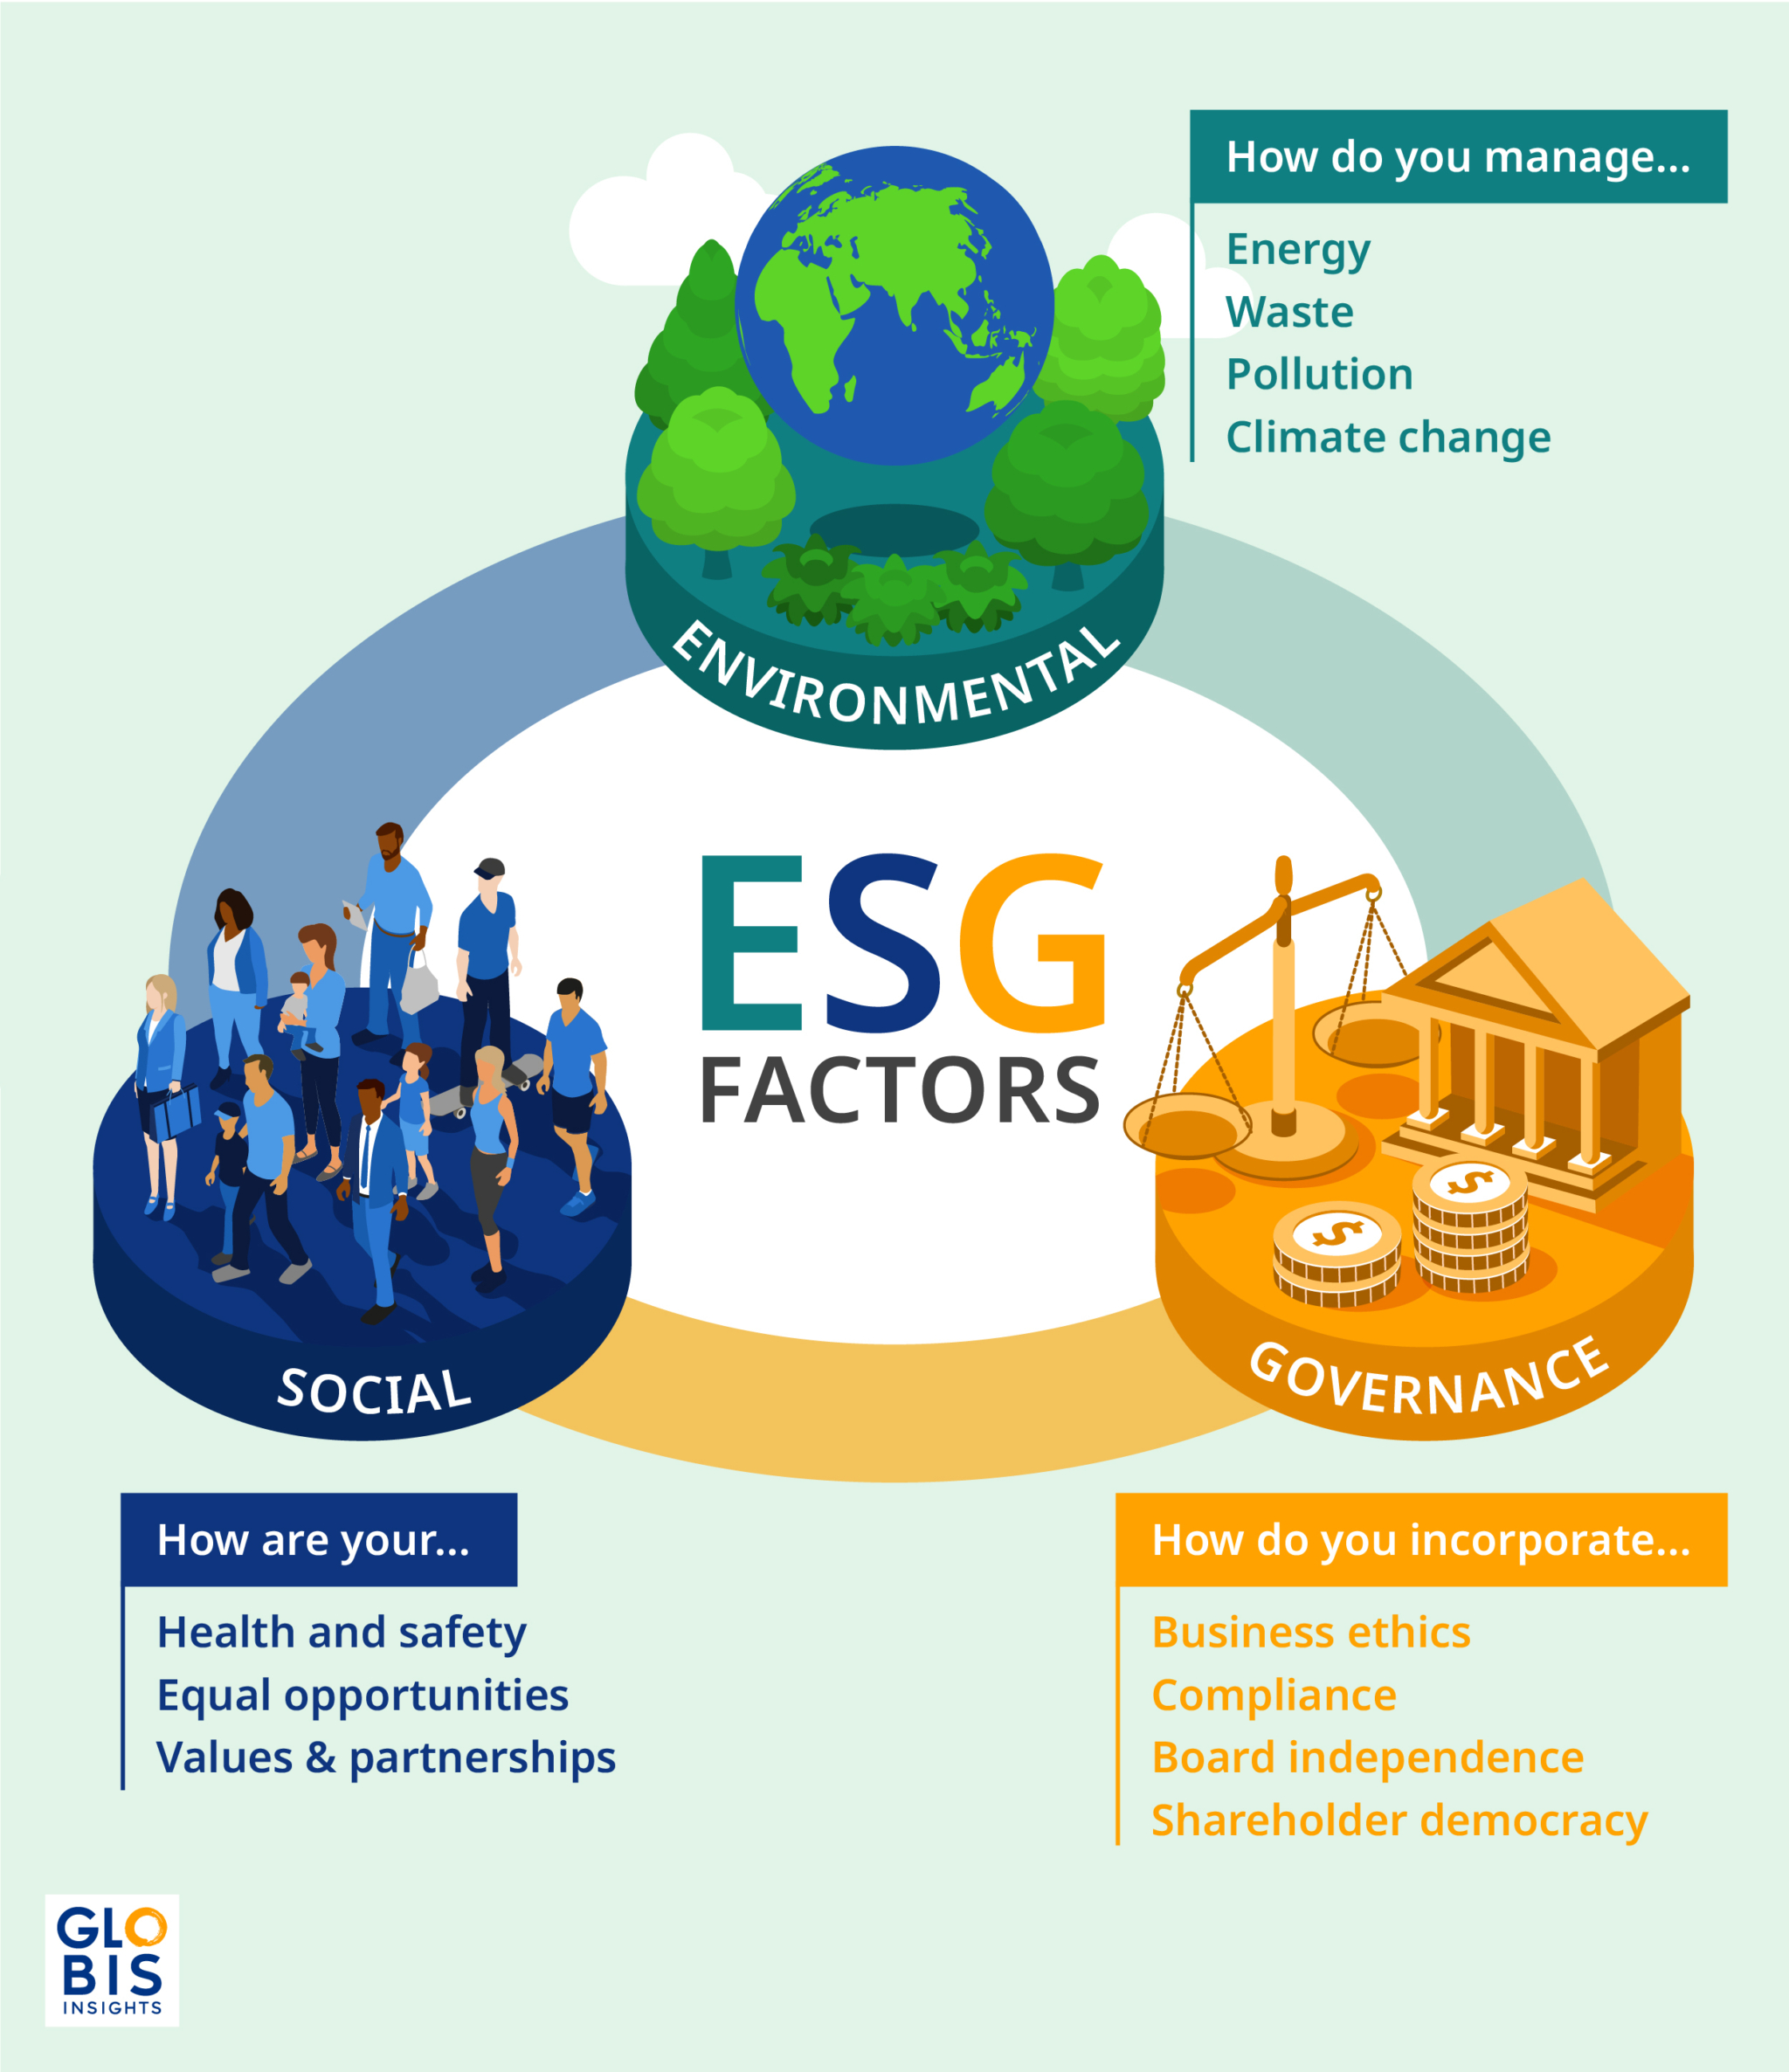 An infographic of ESG, showing the environmental, social, and governance criteria that impact an ESG strategy